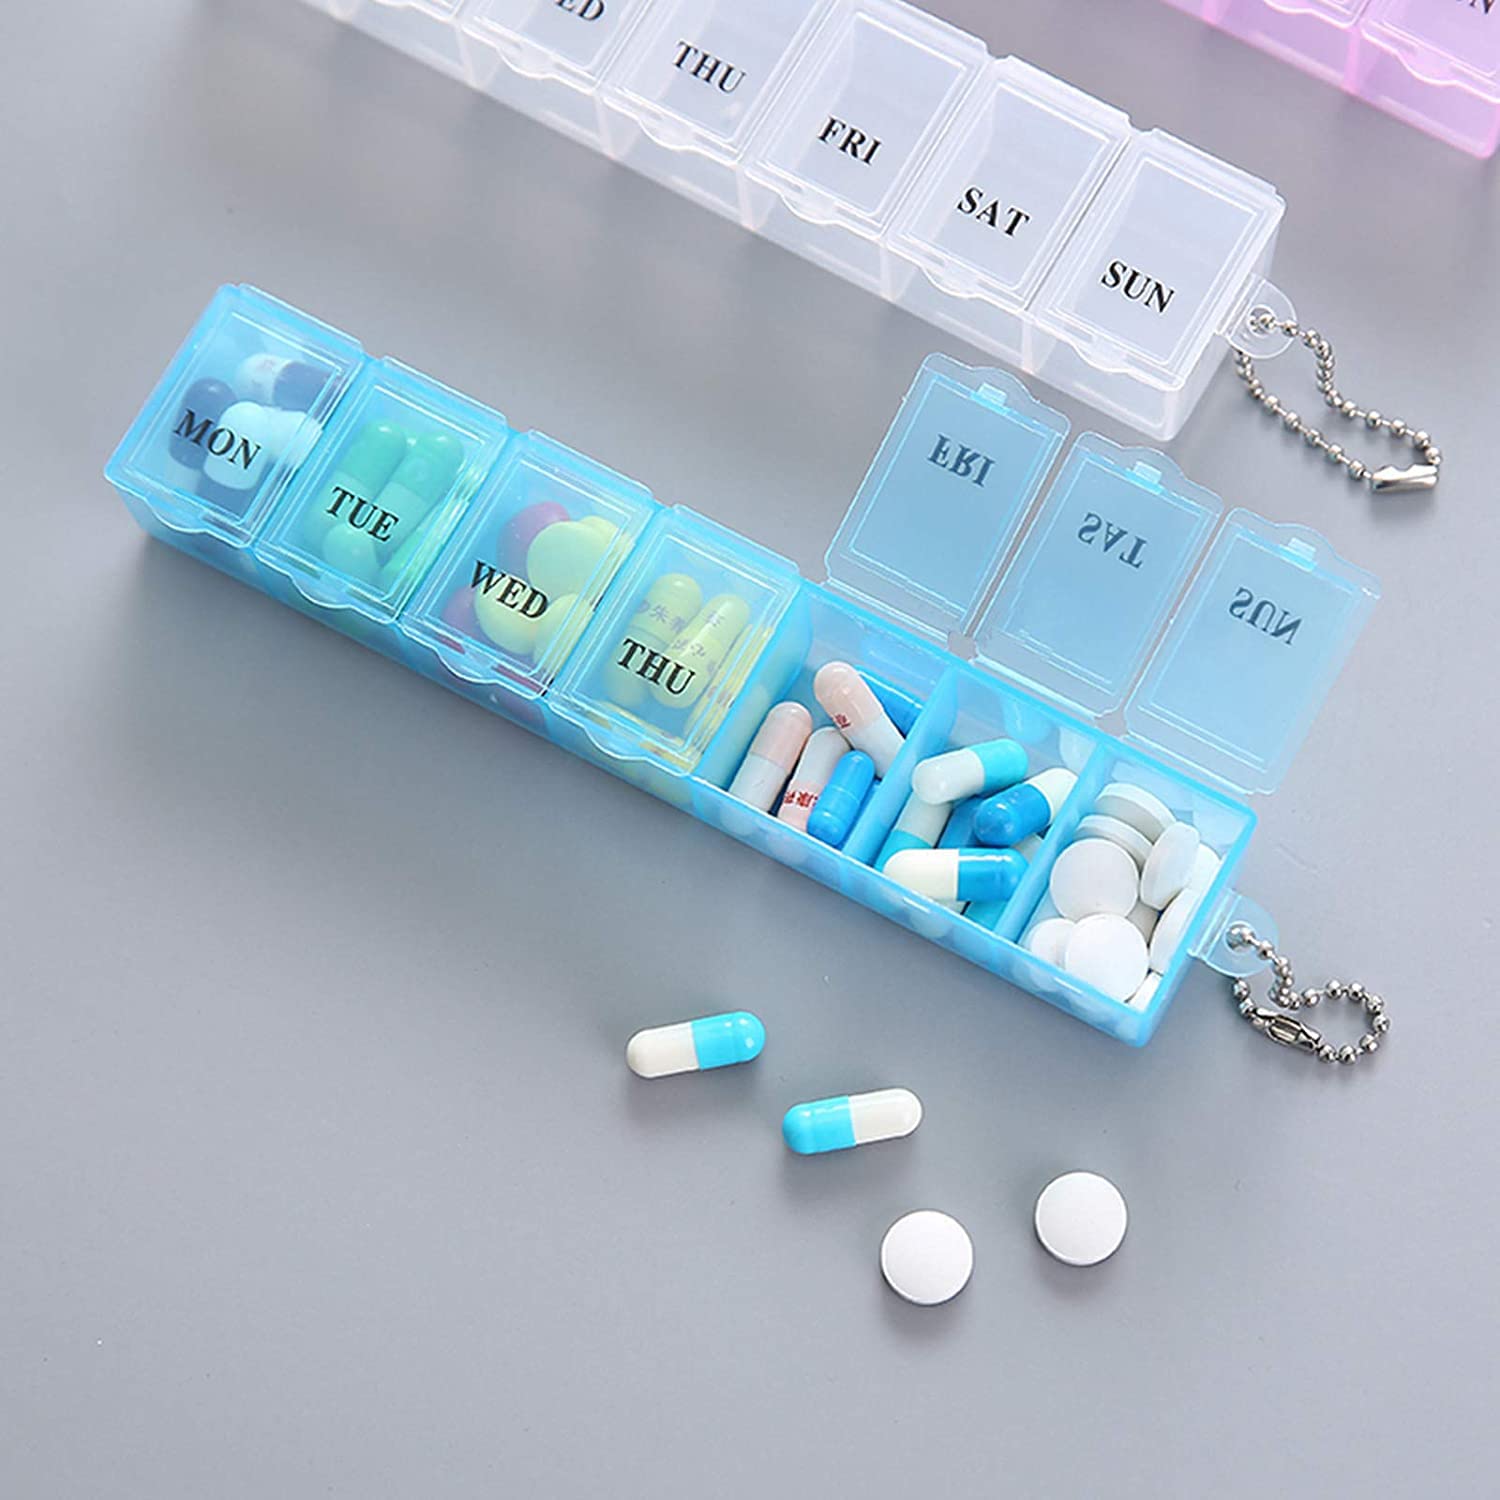 3Pcs Pill Box, Portable Pill Organiser Travel Tablet Box 7 Days Tablet Organiser with Compartments for Medication, Supplements, Vitamins, and Cod Liver Oil(Pink, White and Blue)